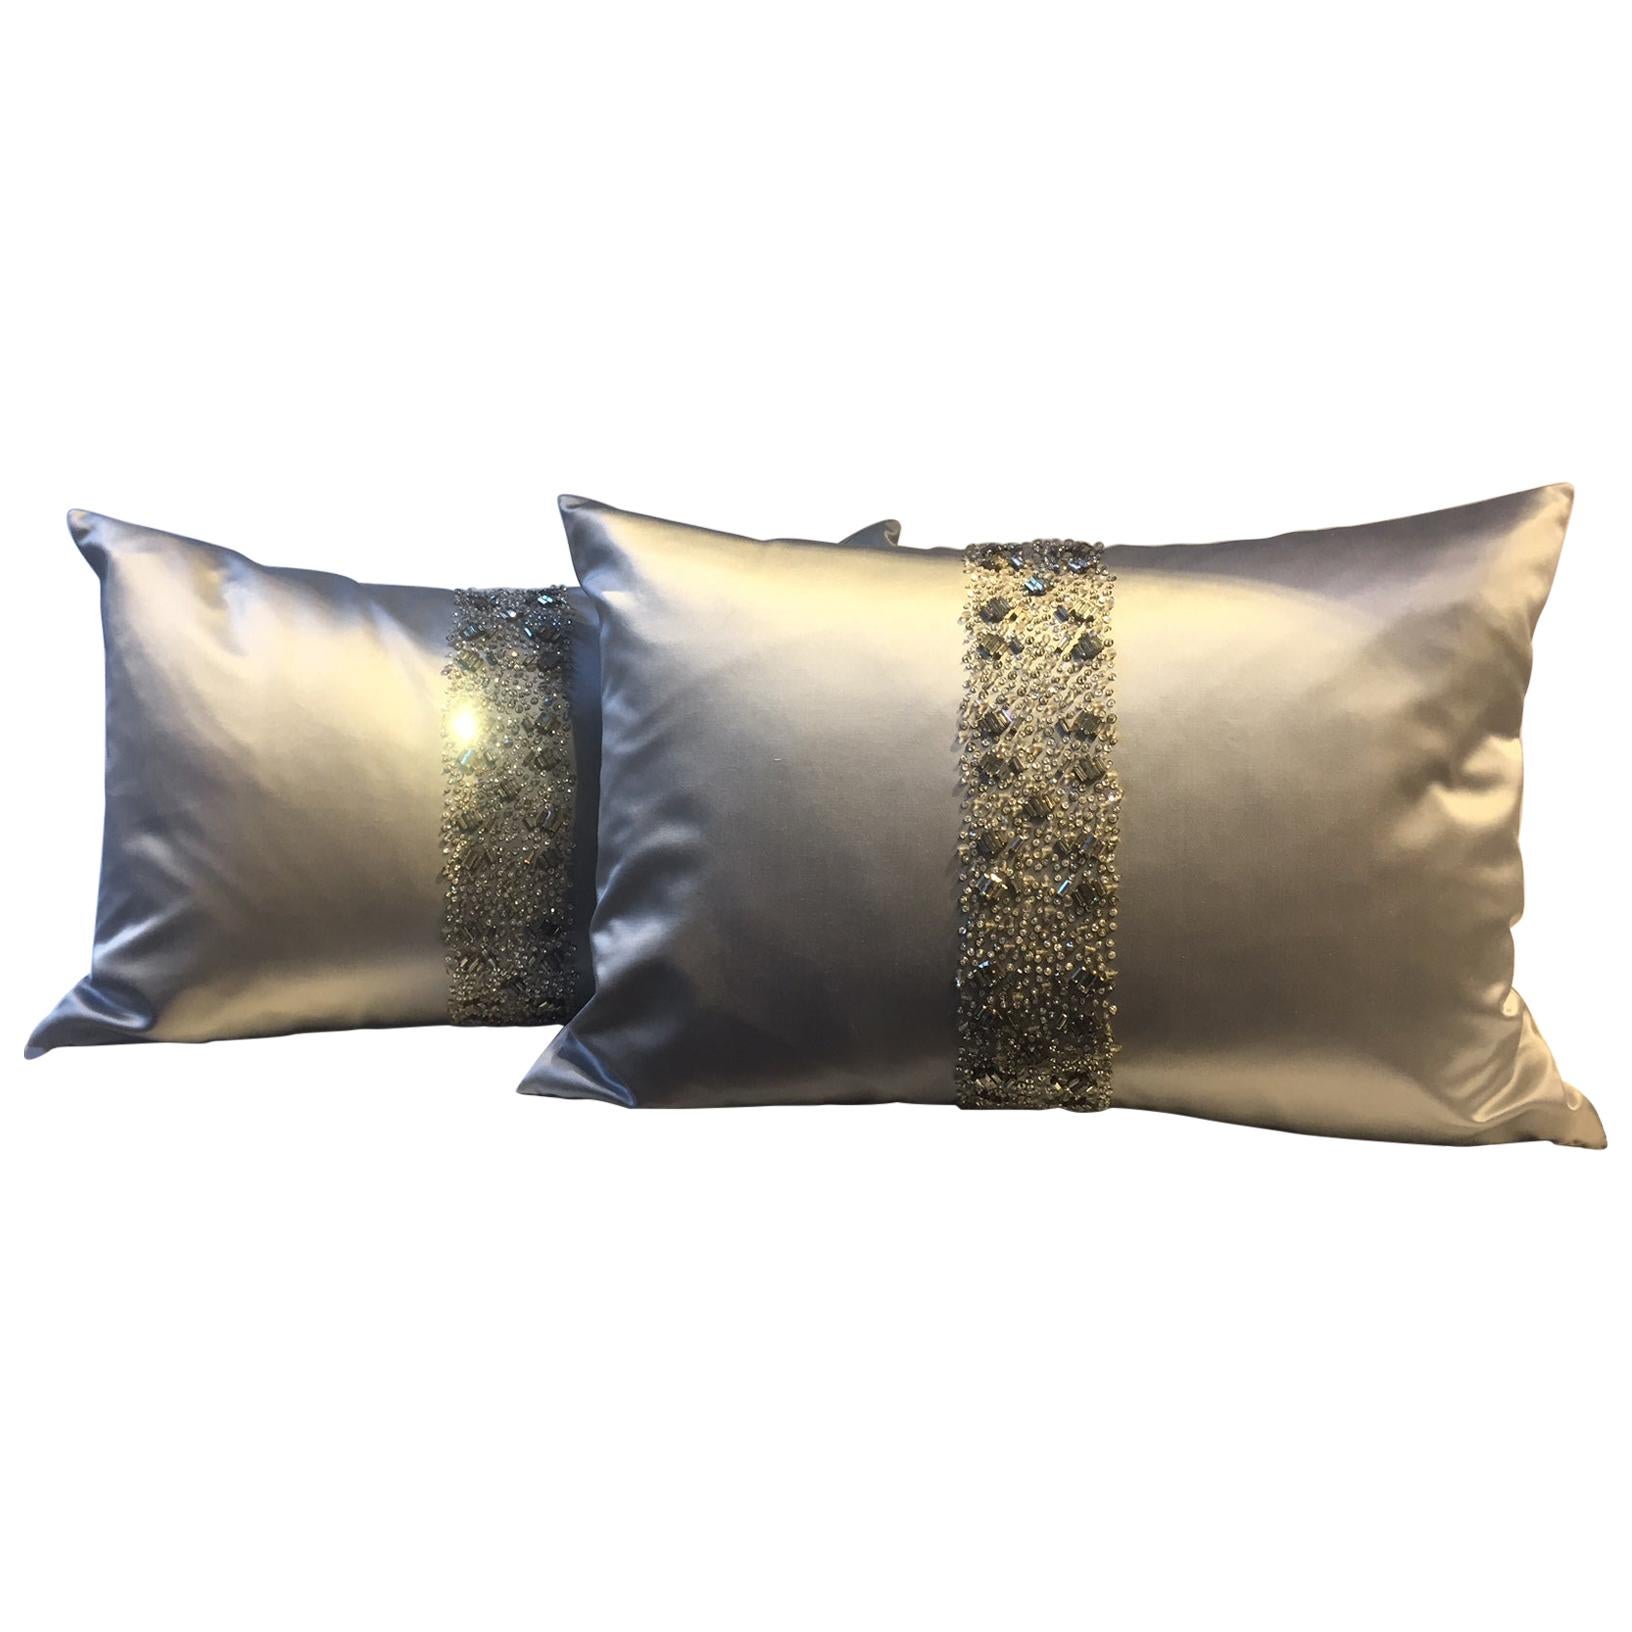 Ice Blue Silk Cushions Hand Embroidery with Band Detail in Swarovski Crystals